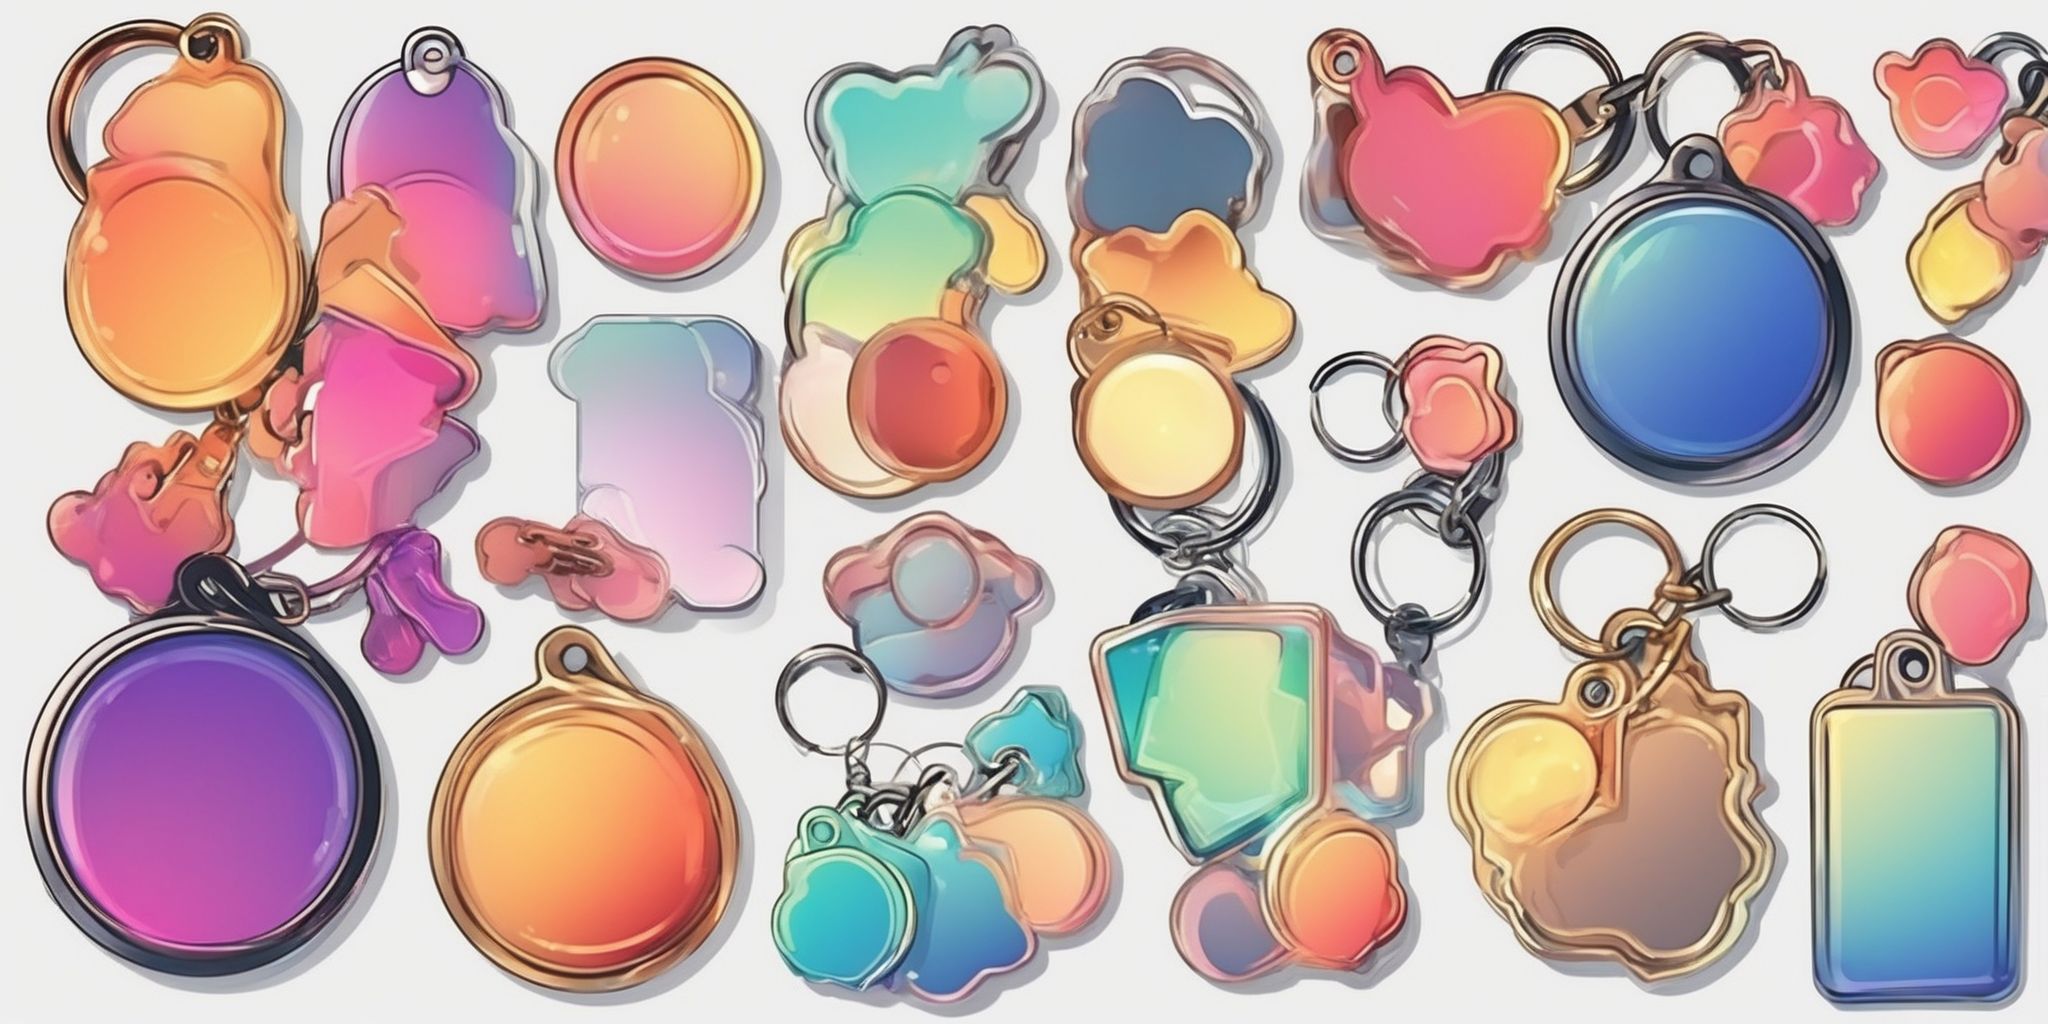 Keychain in illustration style with gradients and white background